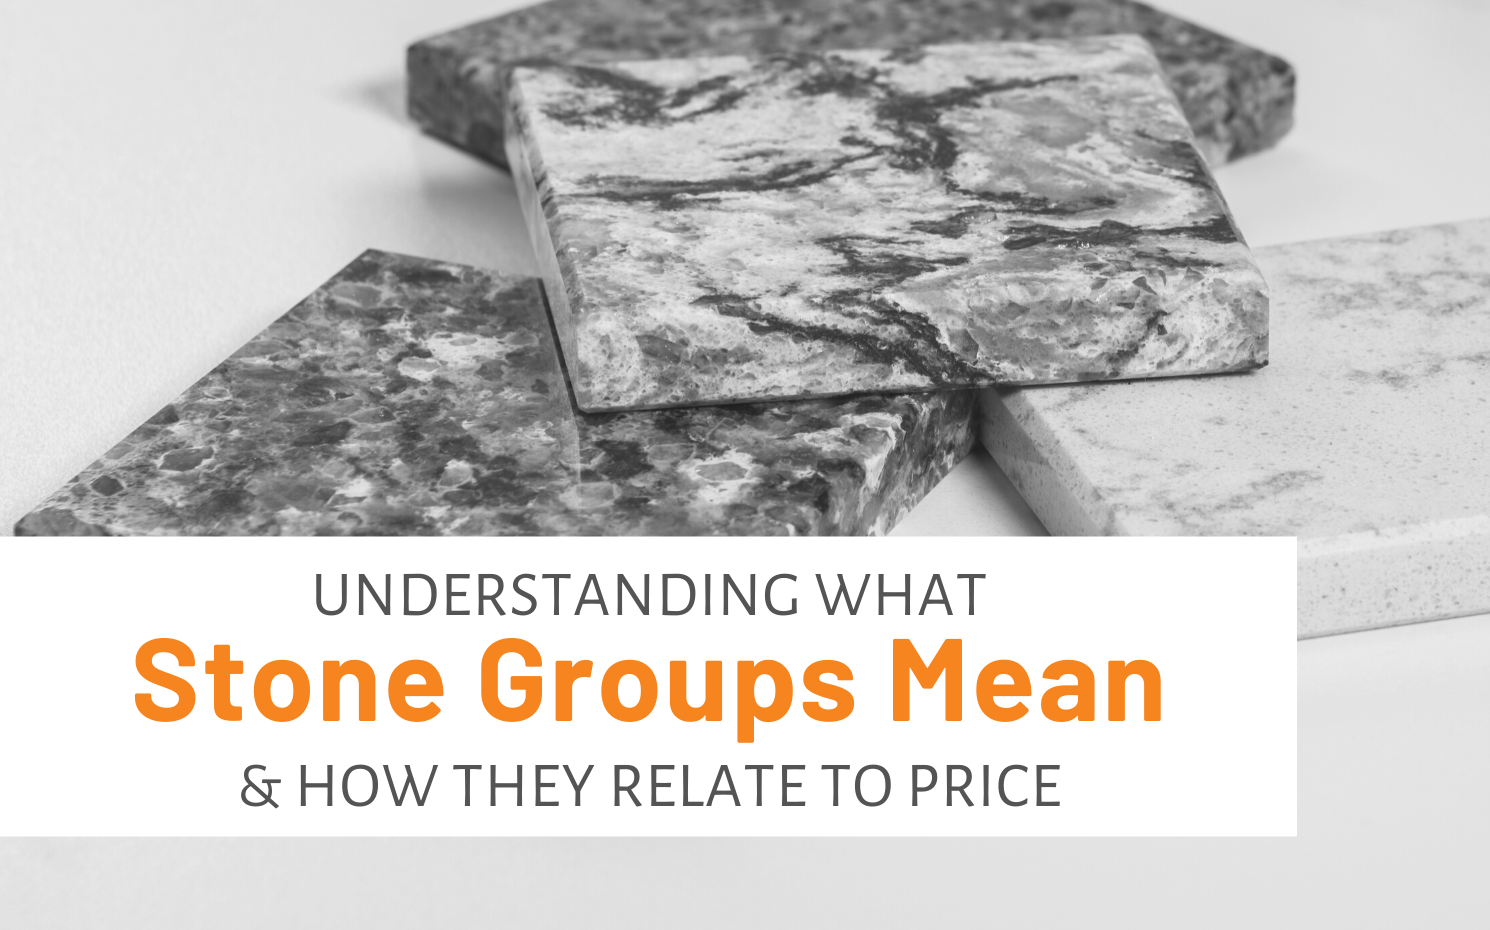 Featured image for "Understanding What Stone Groups Mean & How They Relate To Price" blog post